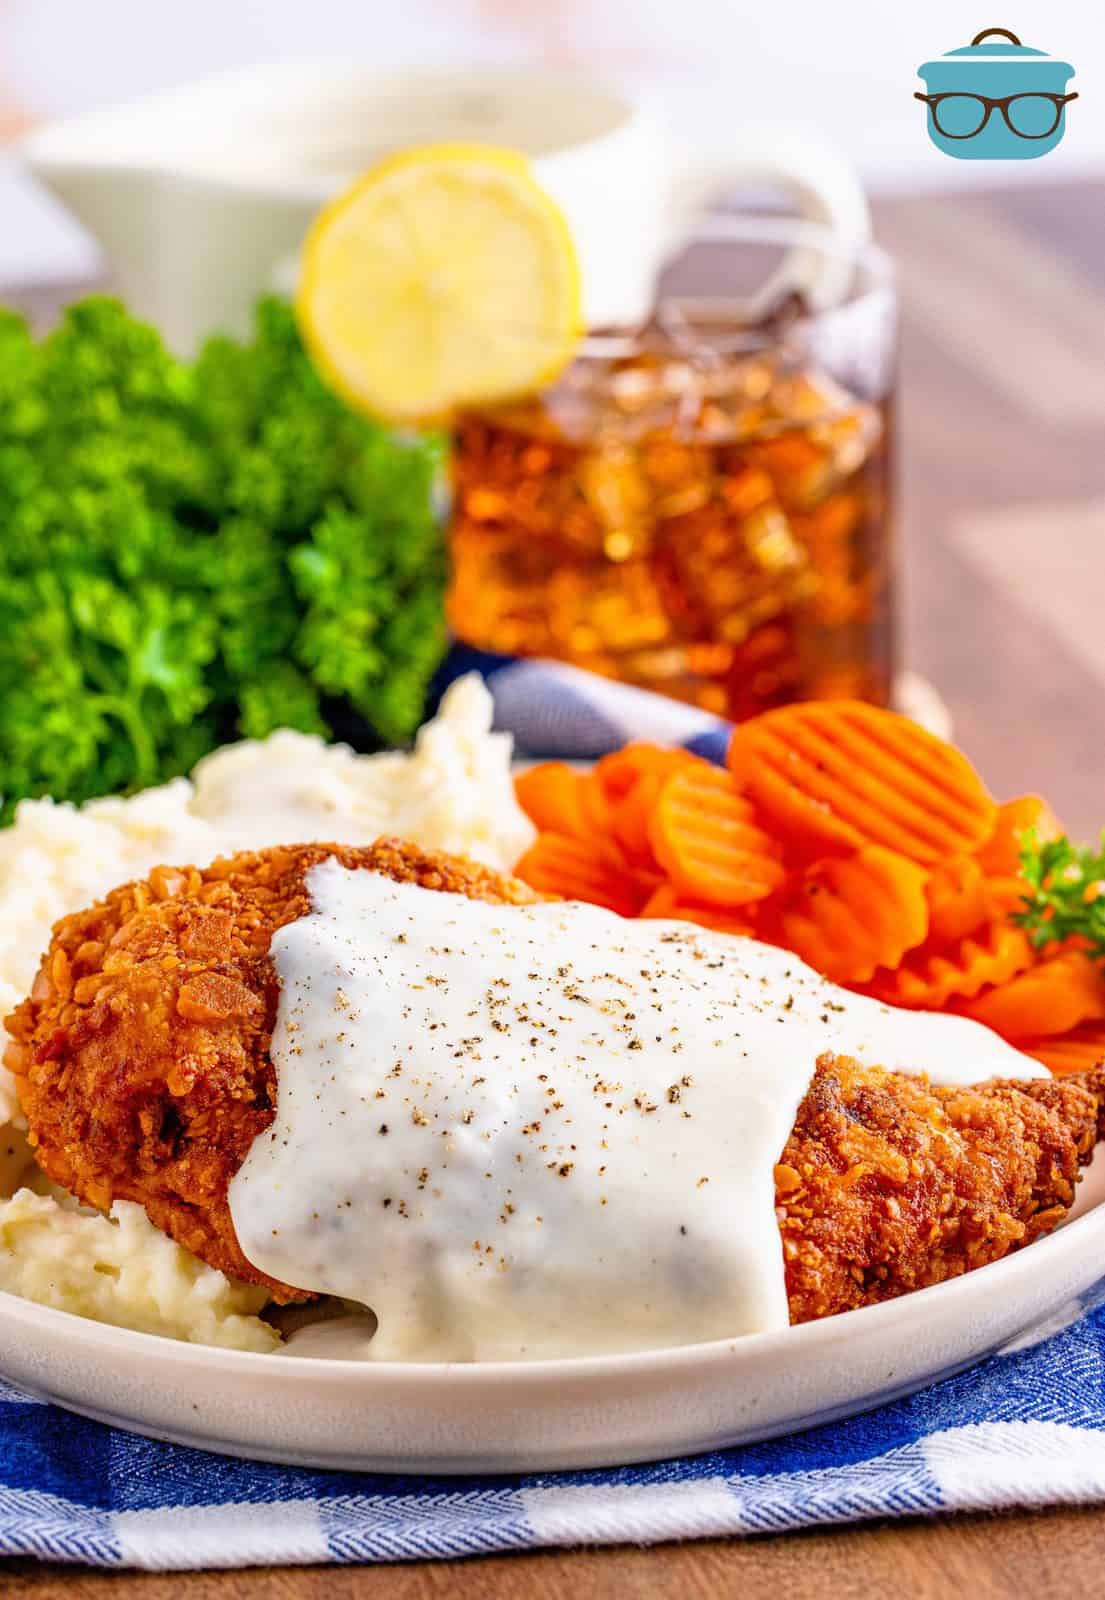 Chicken Fried Chicken on plate with mashed potatoes and carrots.